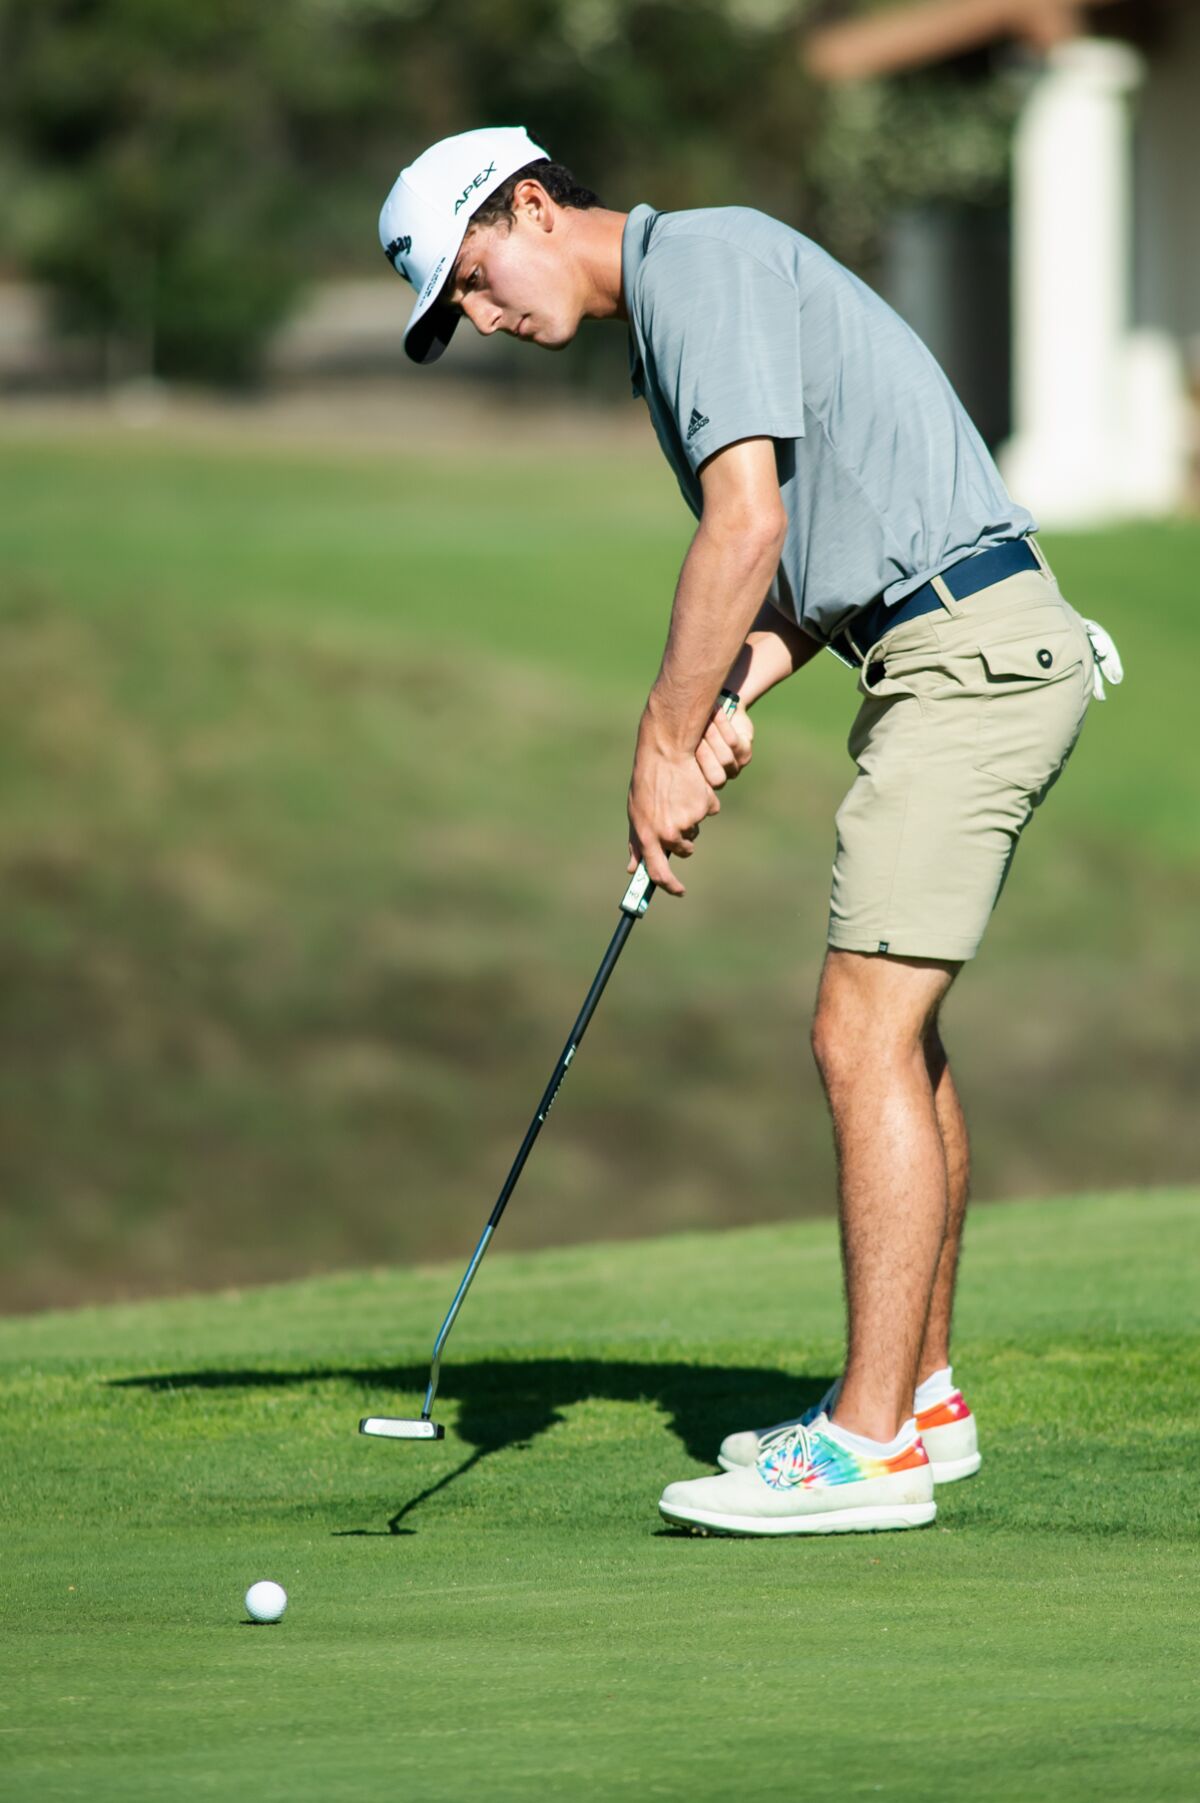 Bishop's School junior Michael Behr transitioned to golf at the onset of the COVID-19 pandemic.